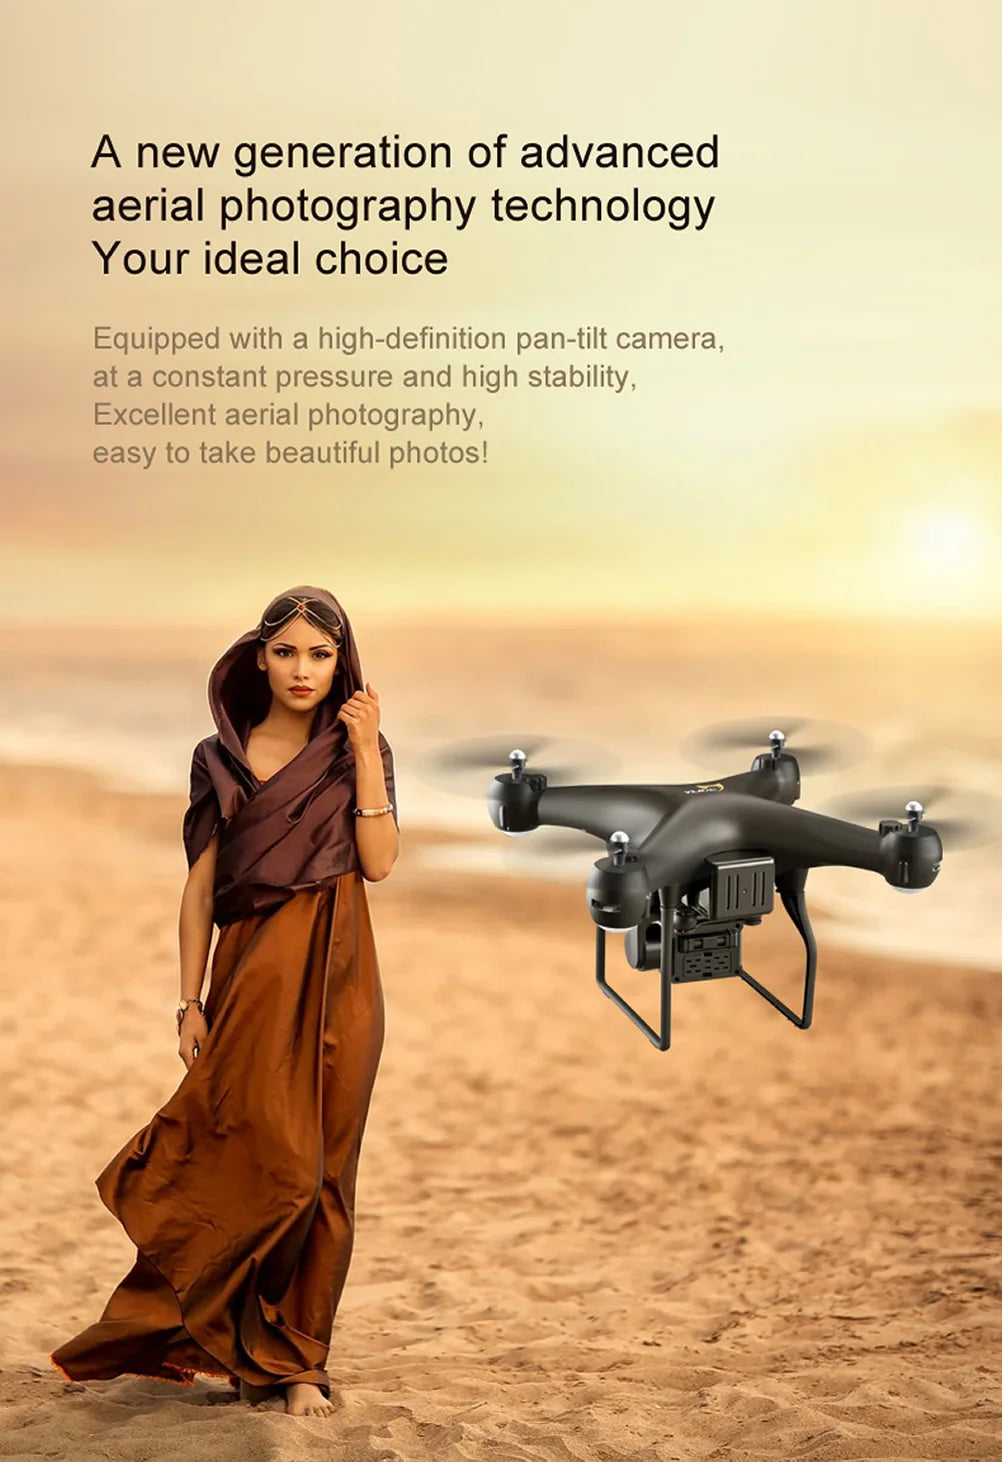 New Remote Control Drone, a new generation of advanced aerial photography technology your ideal choice equipped with